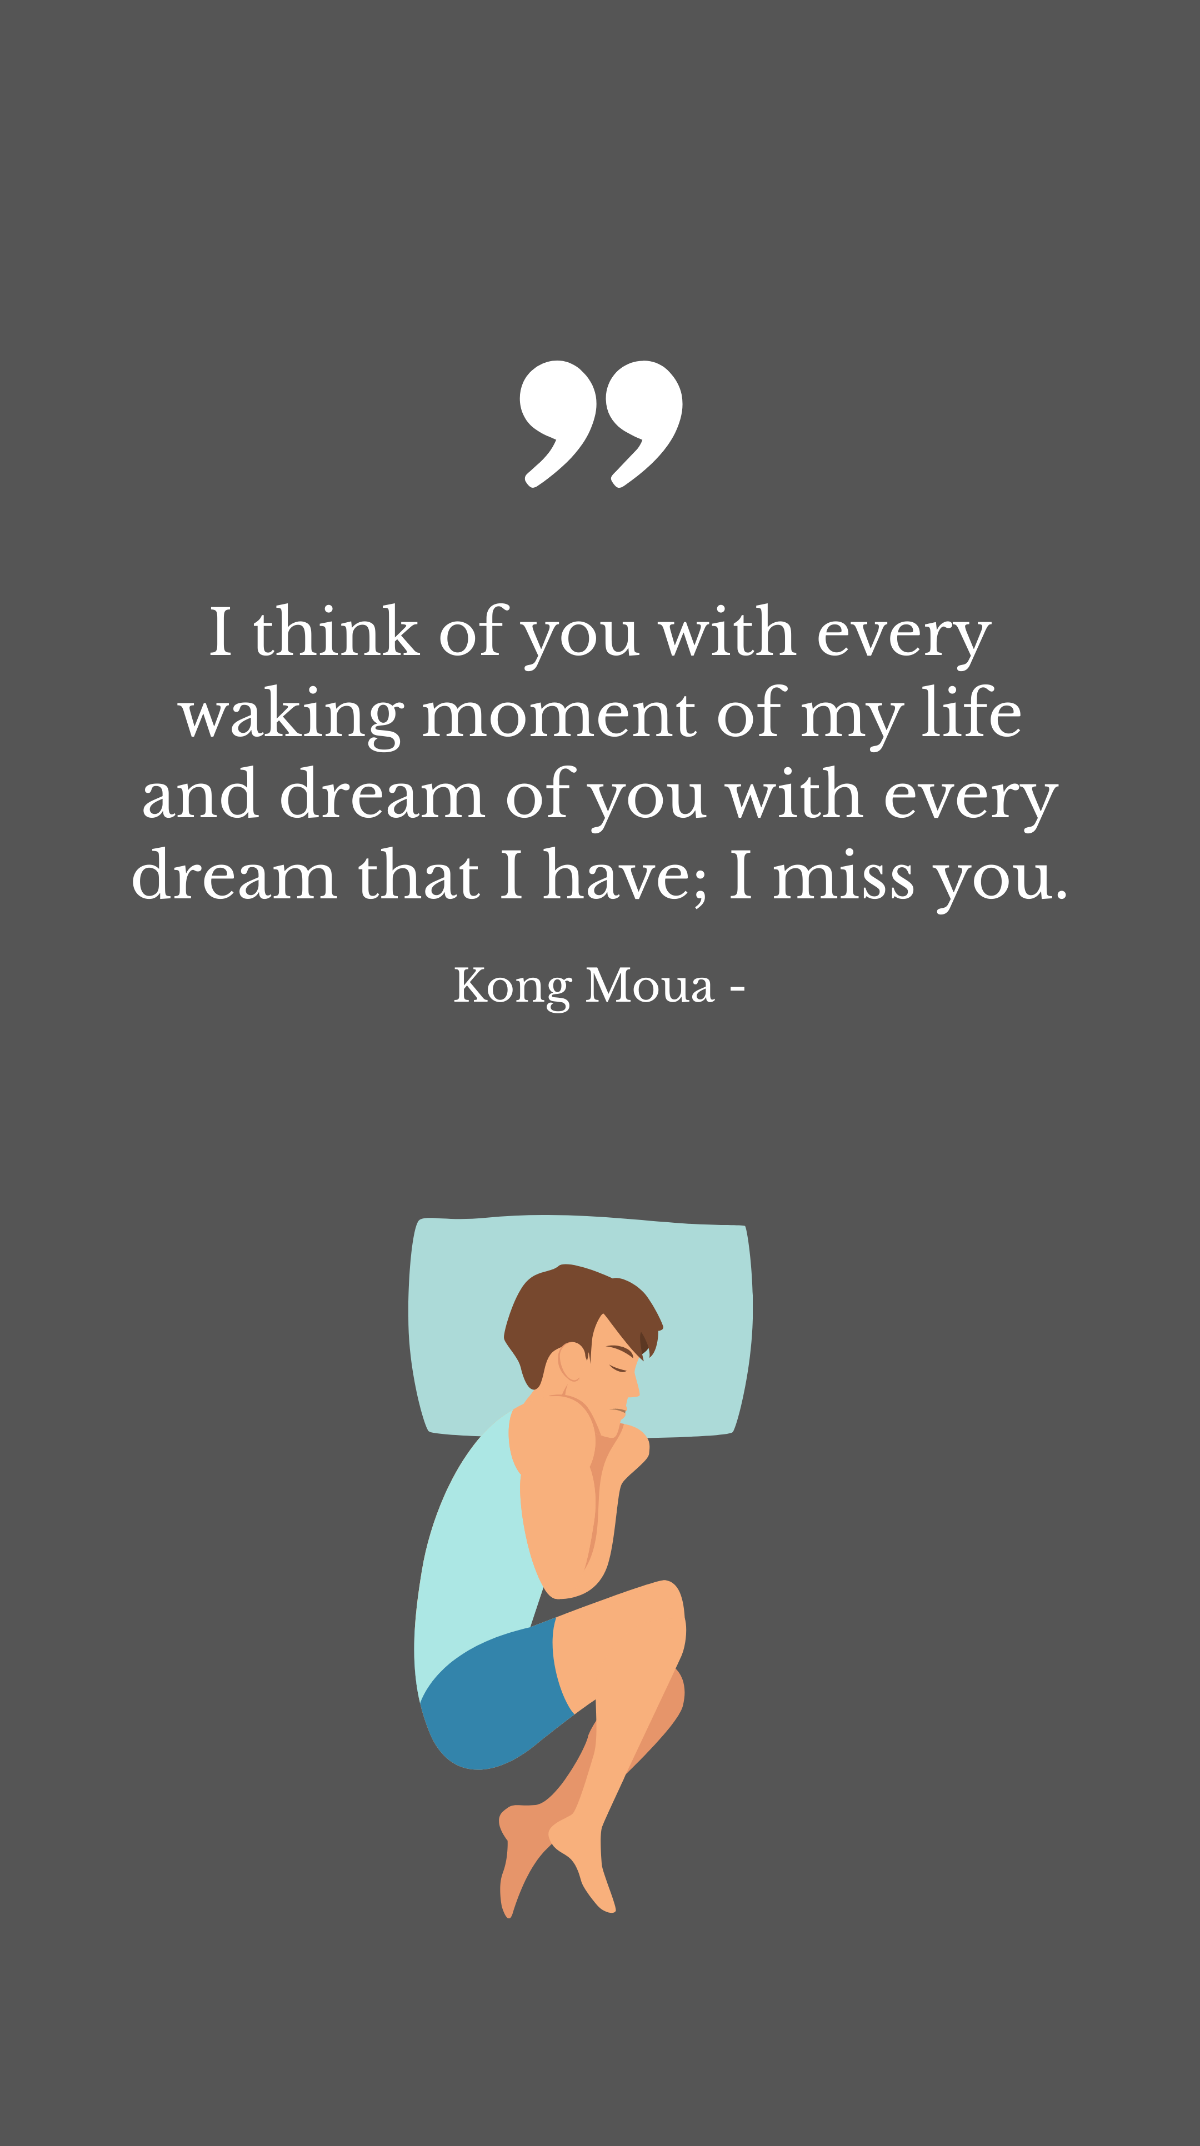 Free Kong Moua - I think of you with every waking moment of my life and dream of you with every dream that I have; I miss you. Template